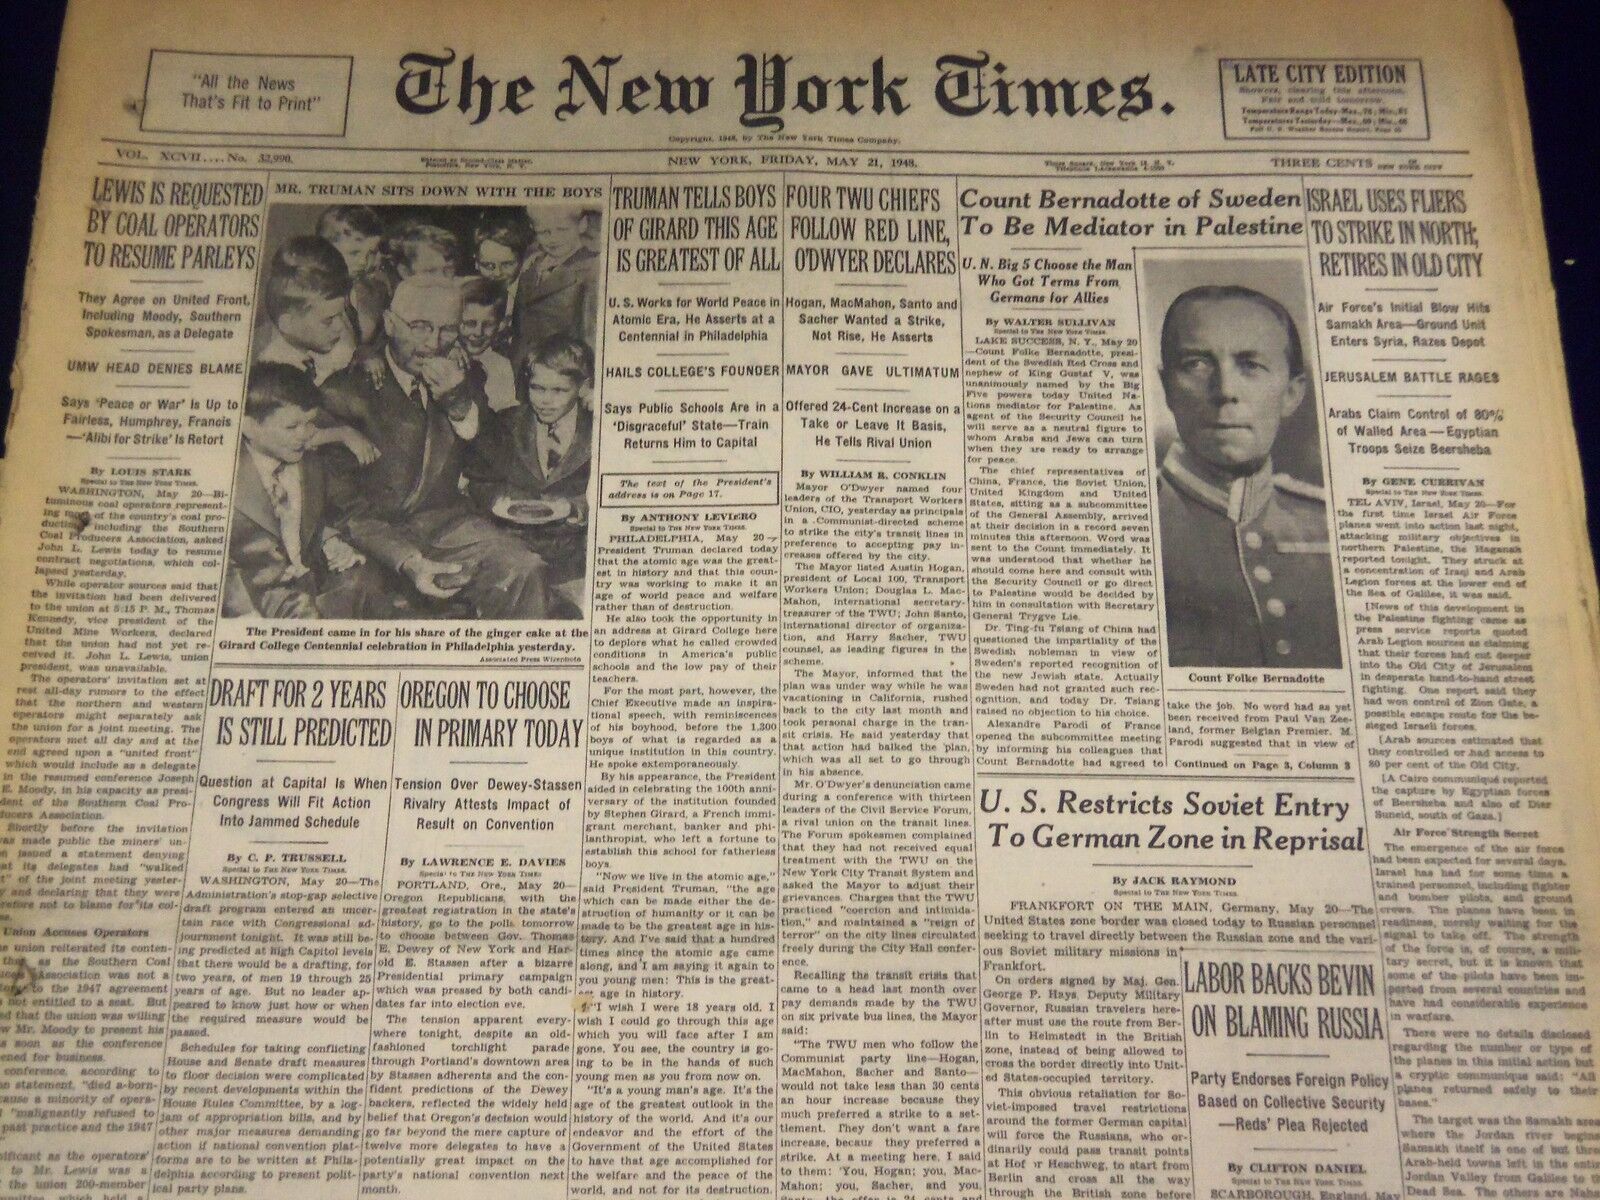 1948 MAY 21 NEW YORK TIMES - BENADOTTE TO MEDIATE IN PALESTINE - NT 3532